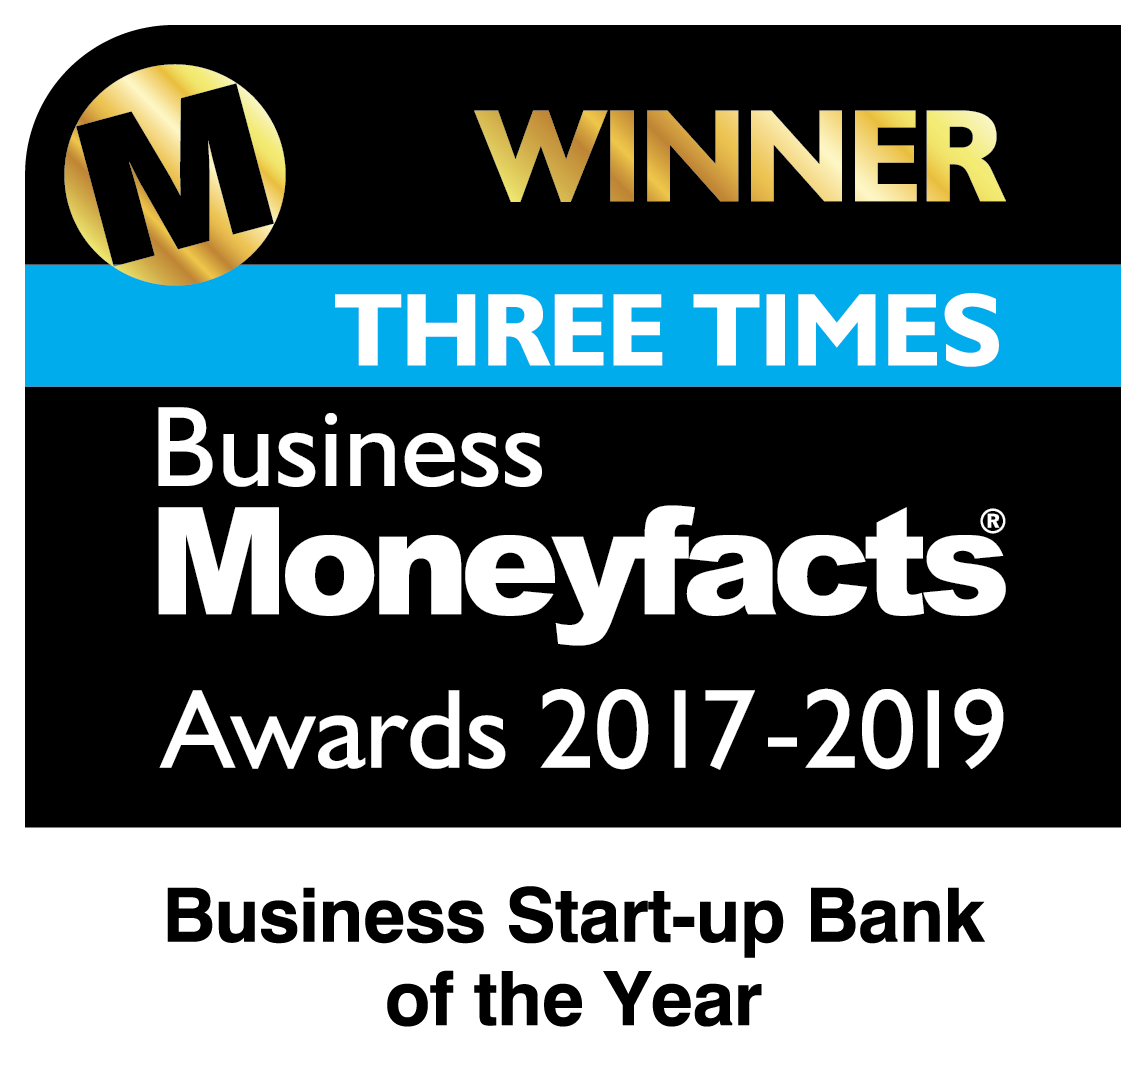 Barclays is the winner of Business Moneyfacts Award 2018 - Business Start-up Bank of the year